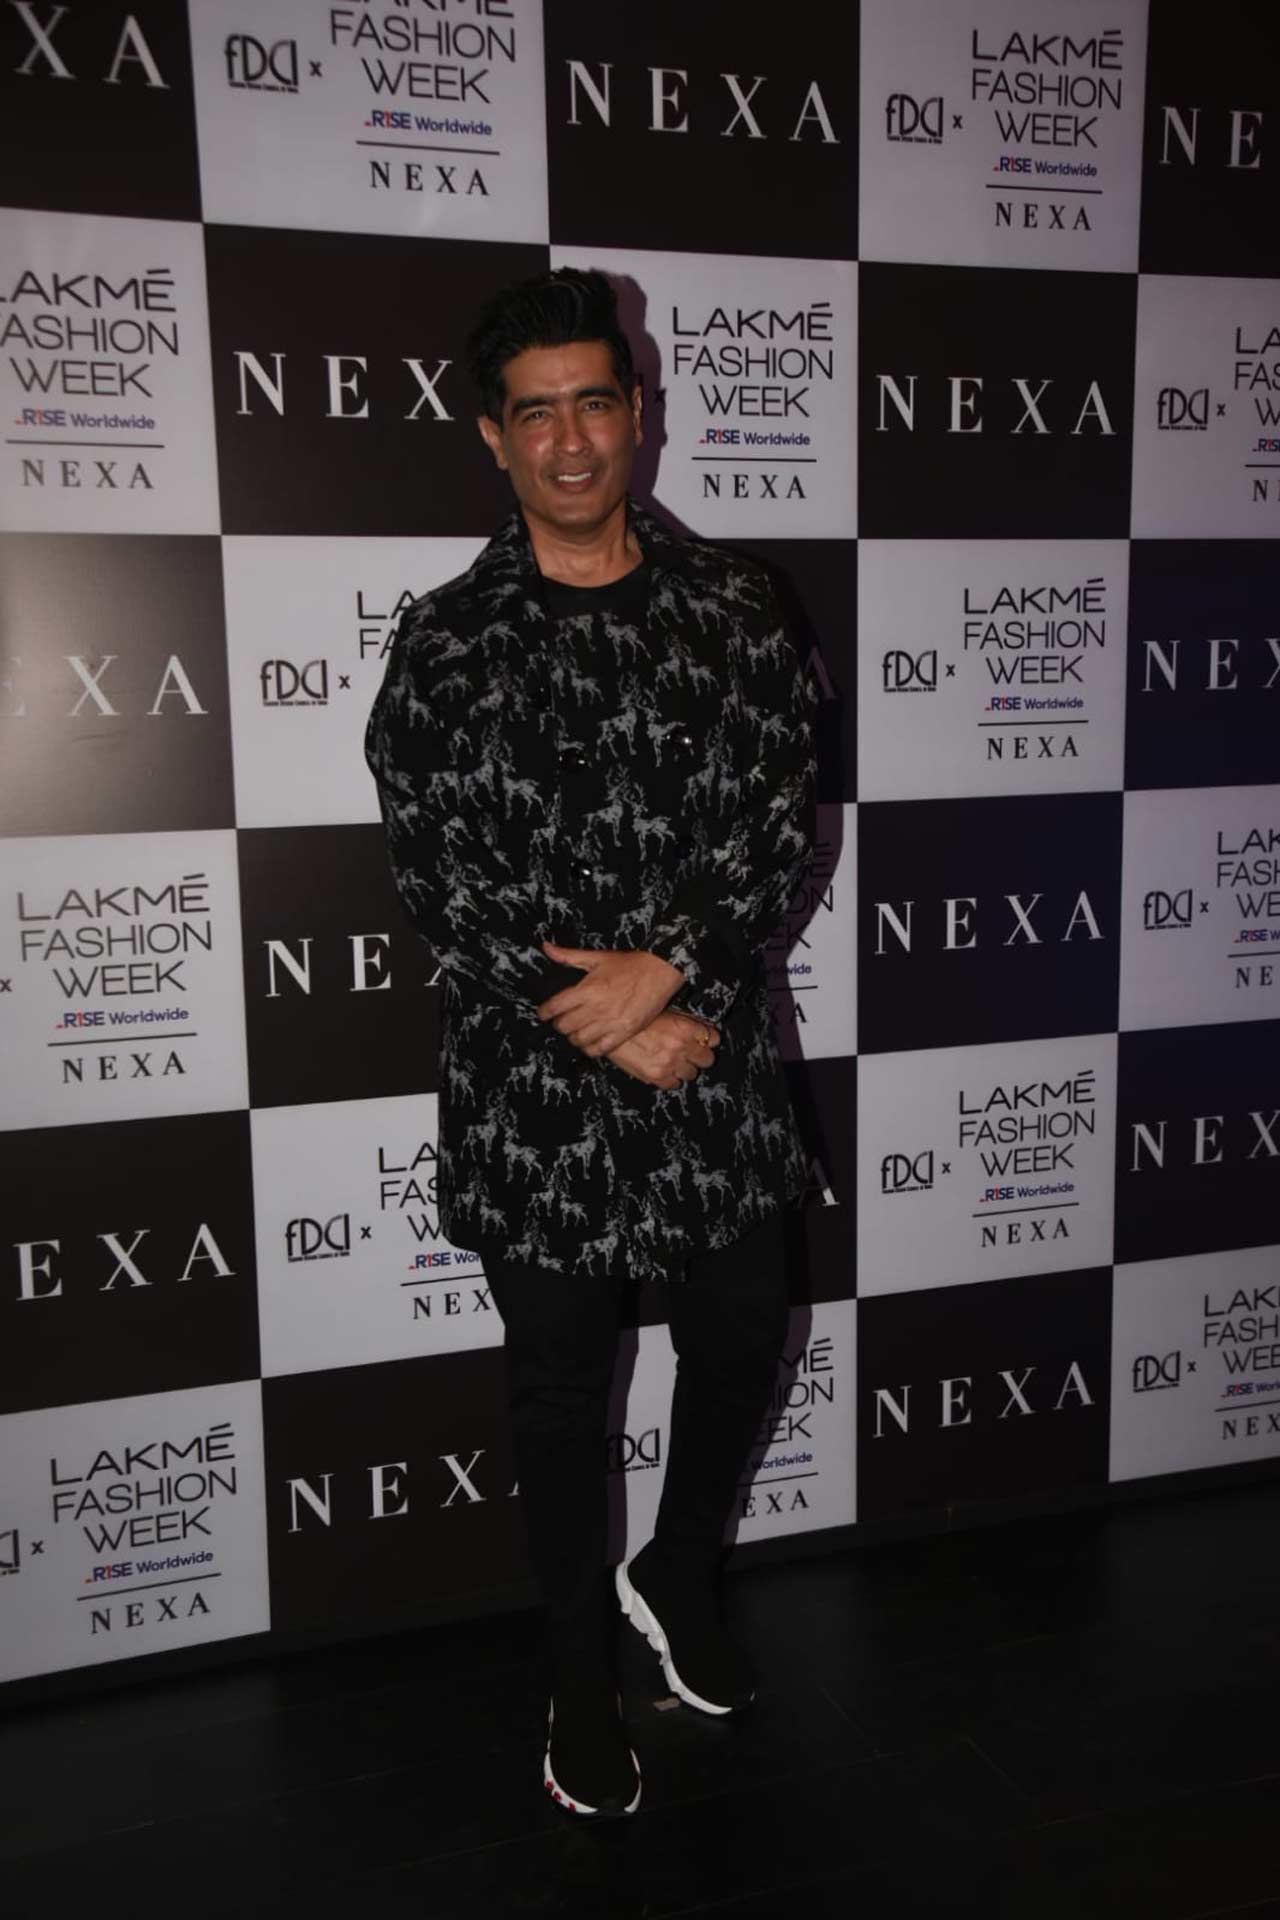 Manish Malhotra showed off his uber-cool side in this all-black outfit as he attended the night of fashion.